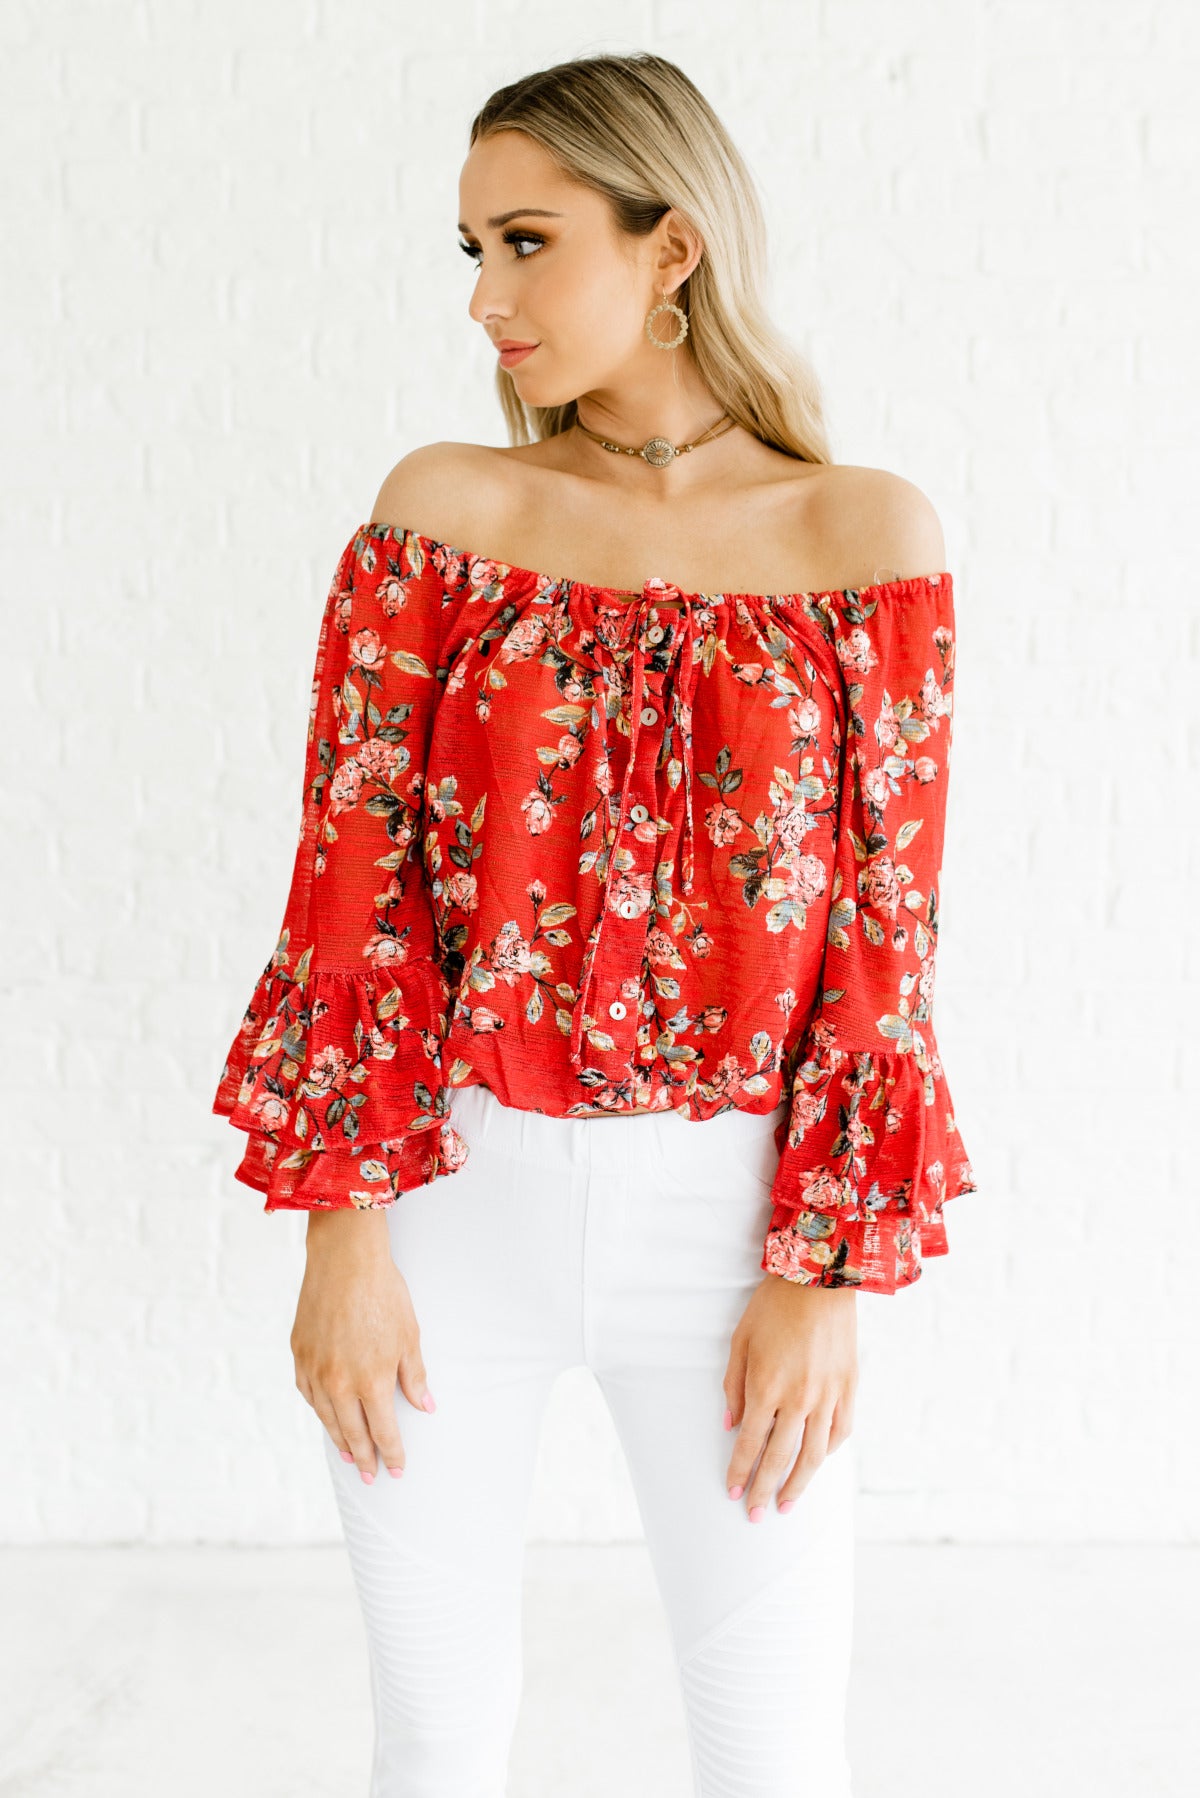 cute red off the shoulder tops